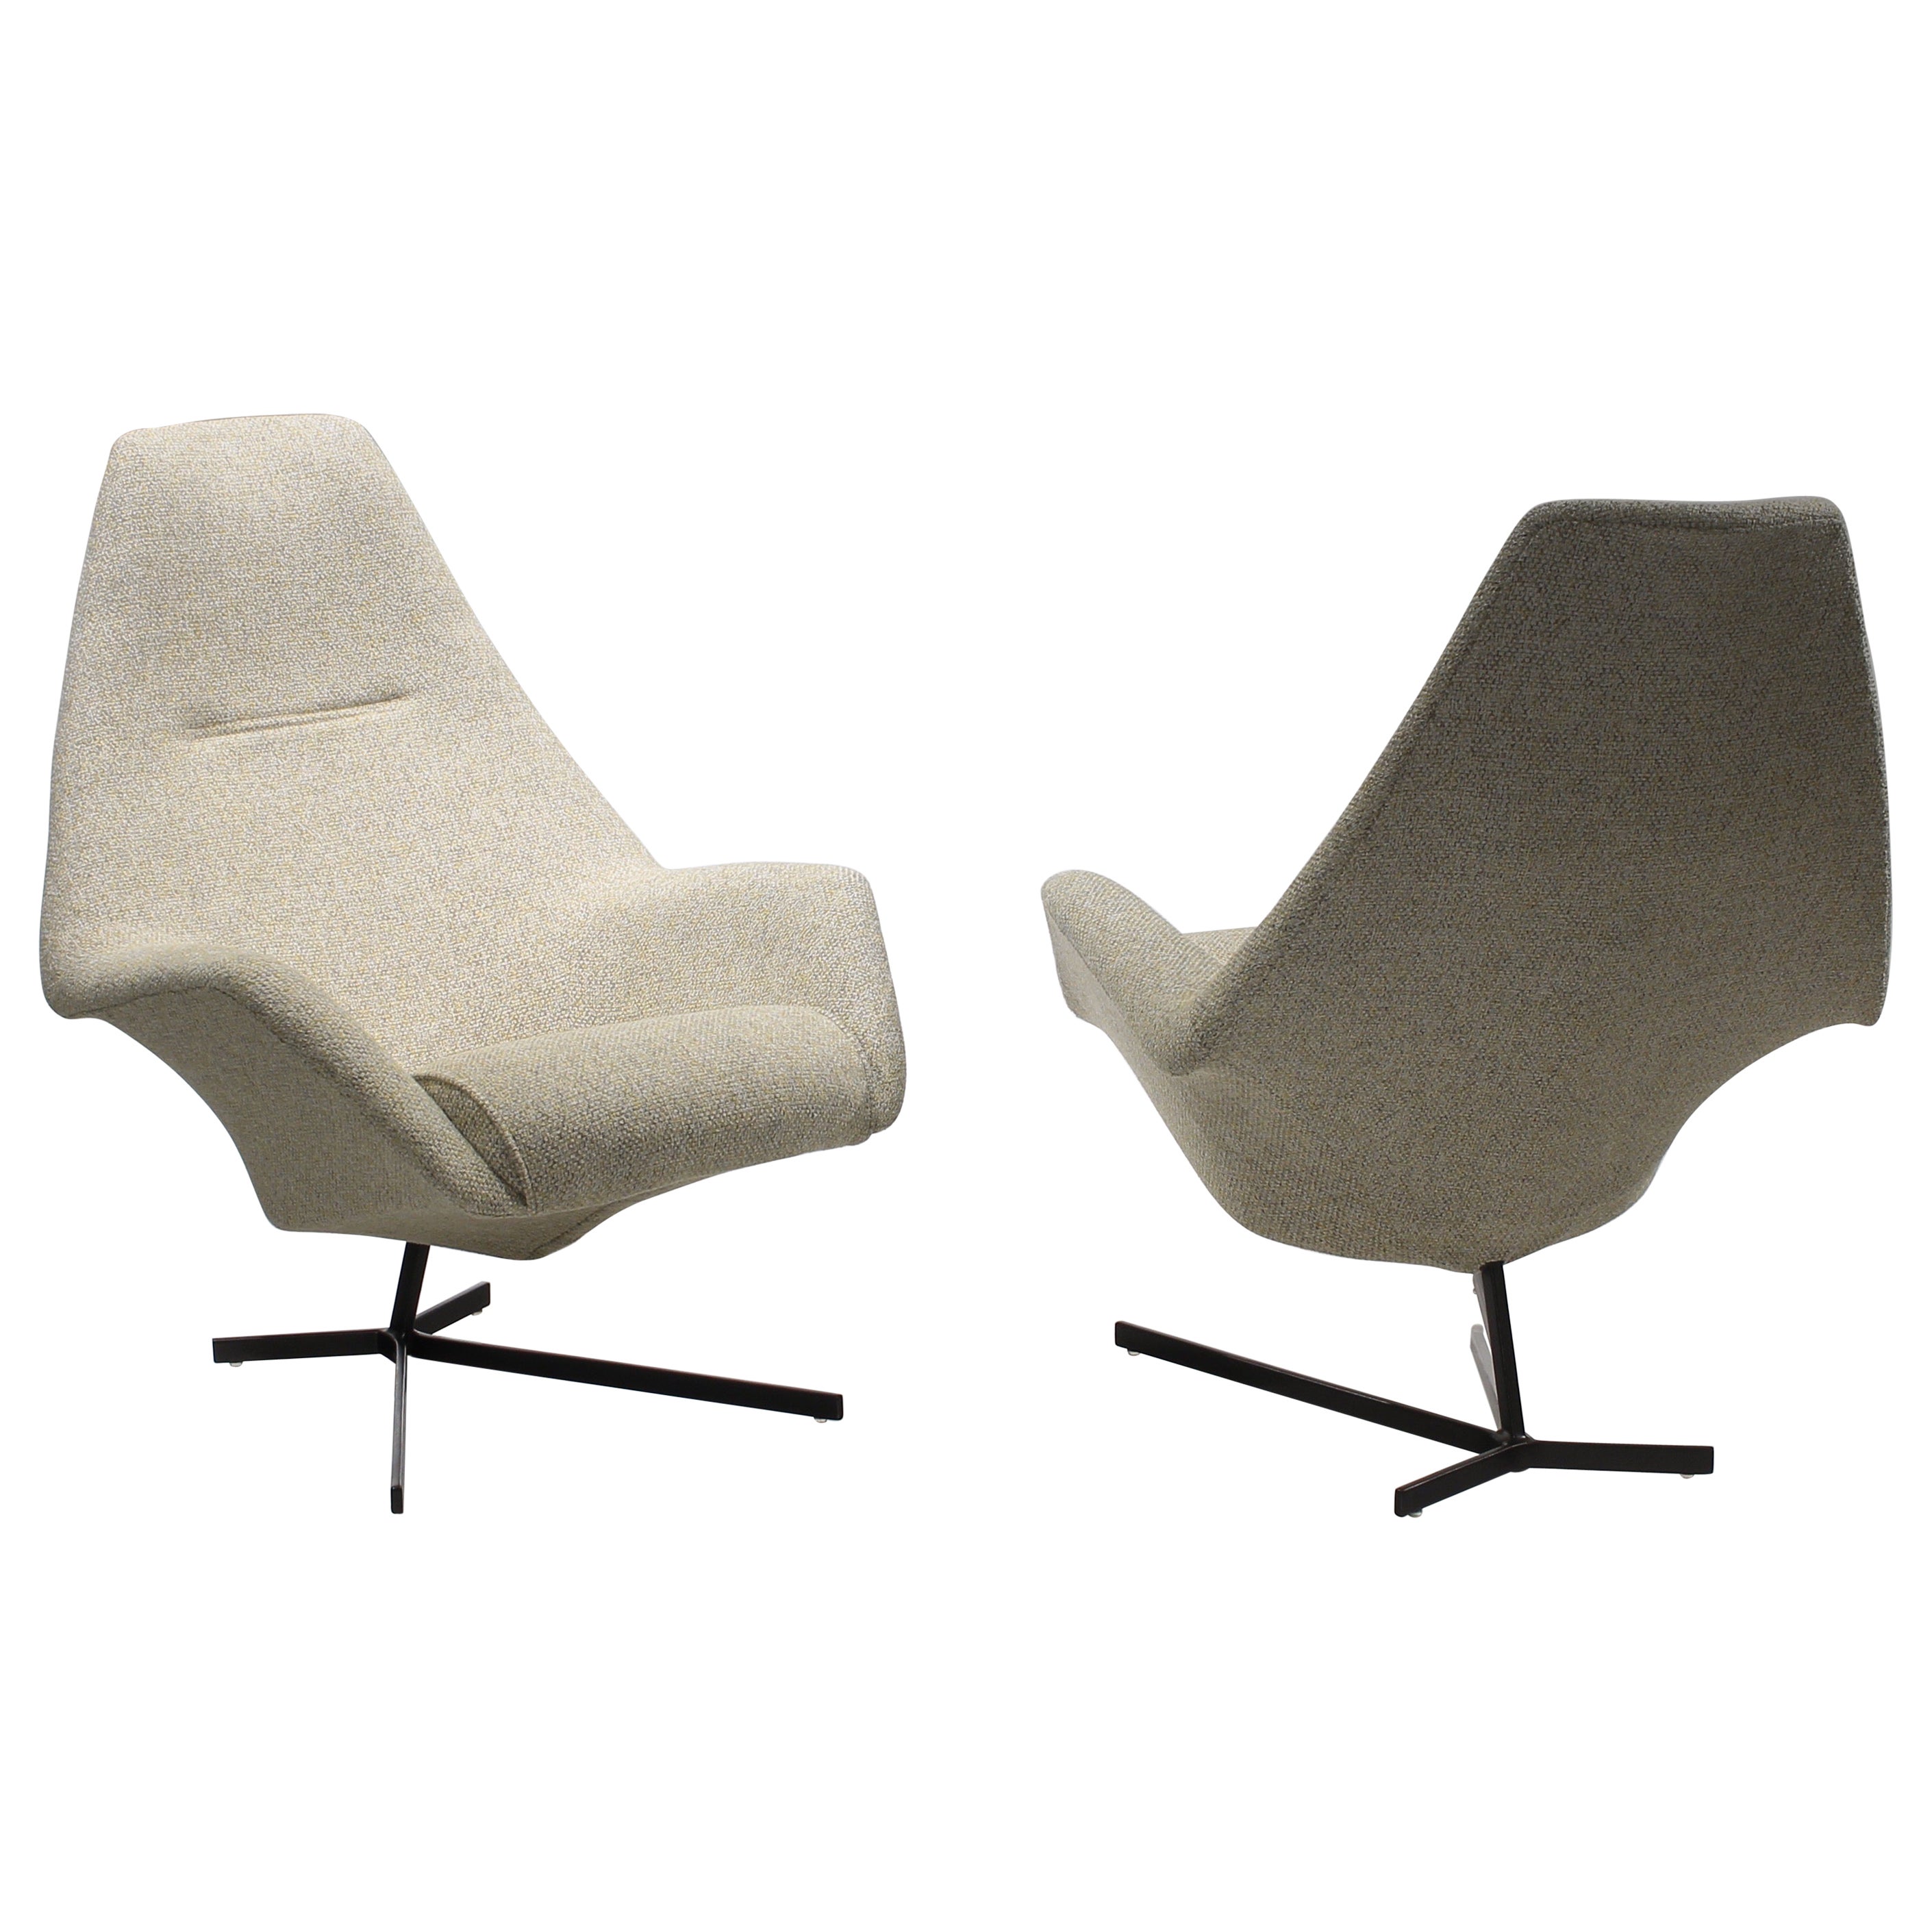 Mid Century Modern Lounge Chairs by Peter Hoyte "Ph6" Cantilever